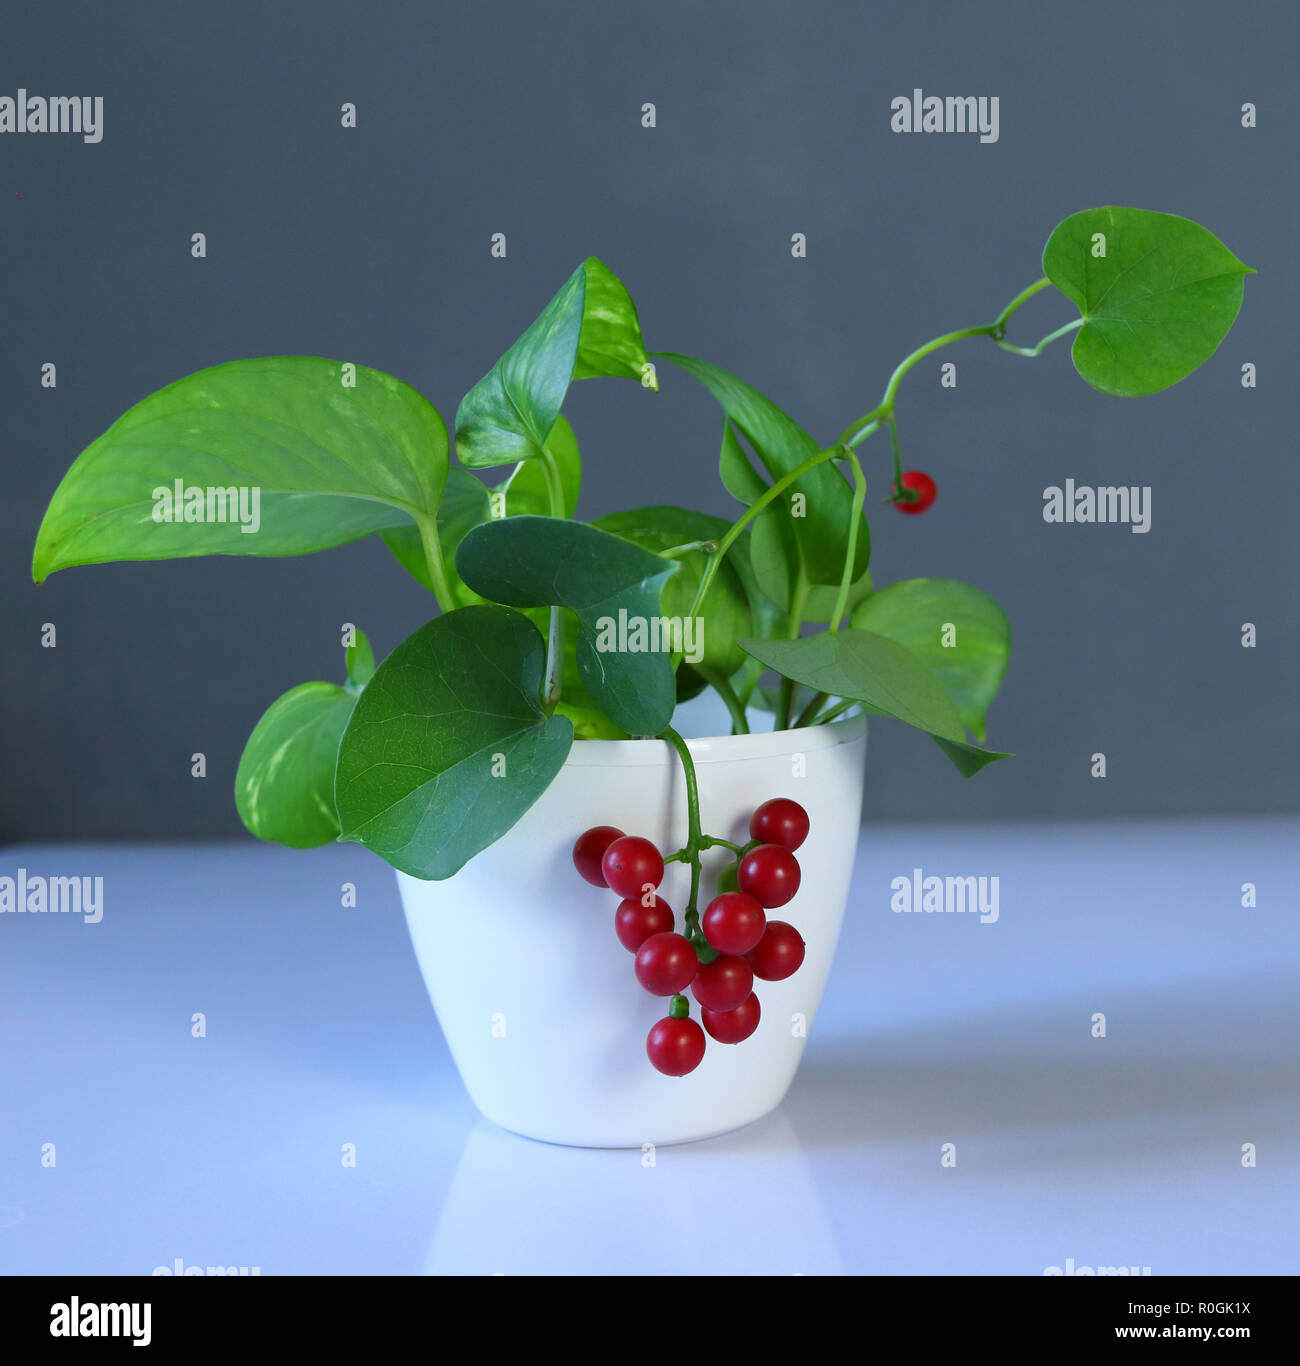 A isolated plant in a pot Stock Photo